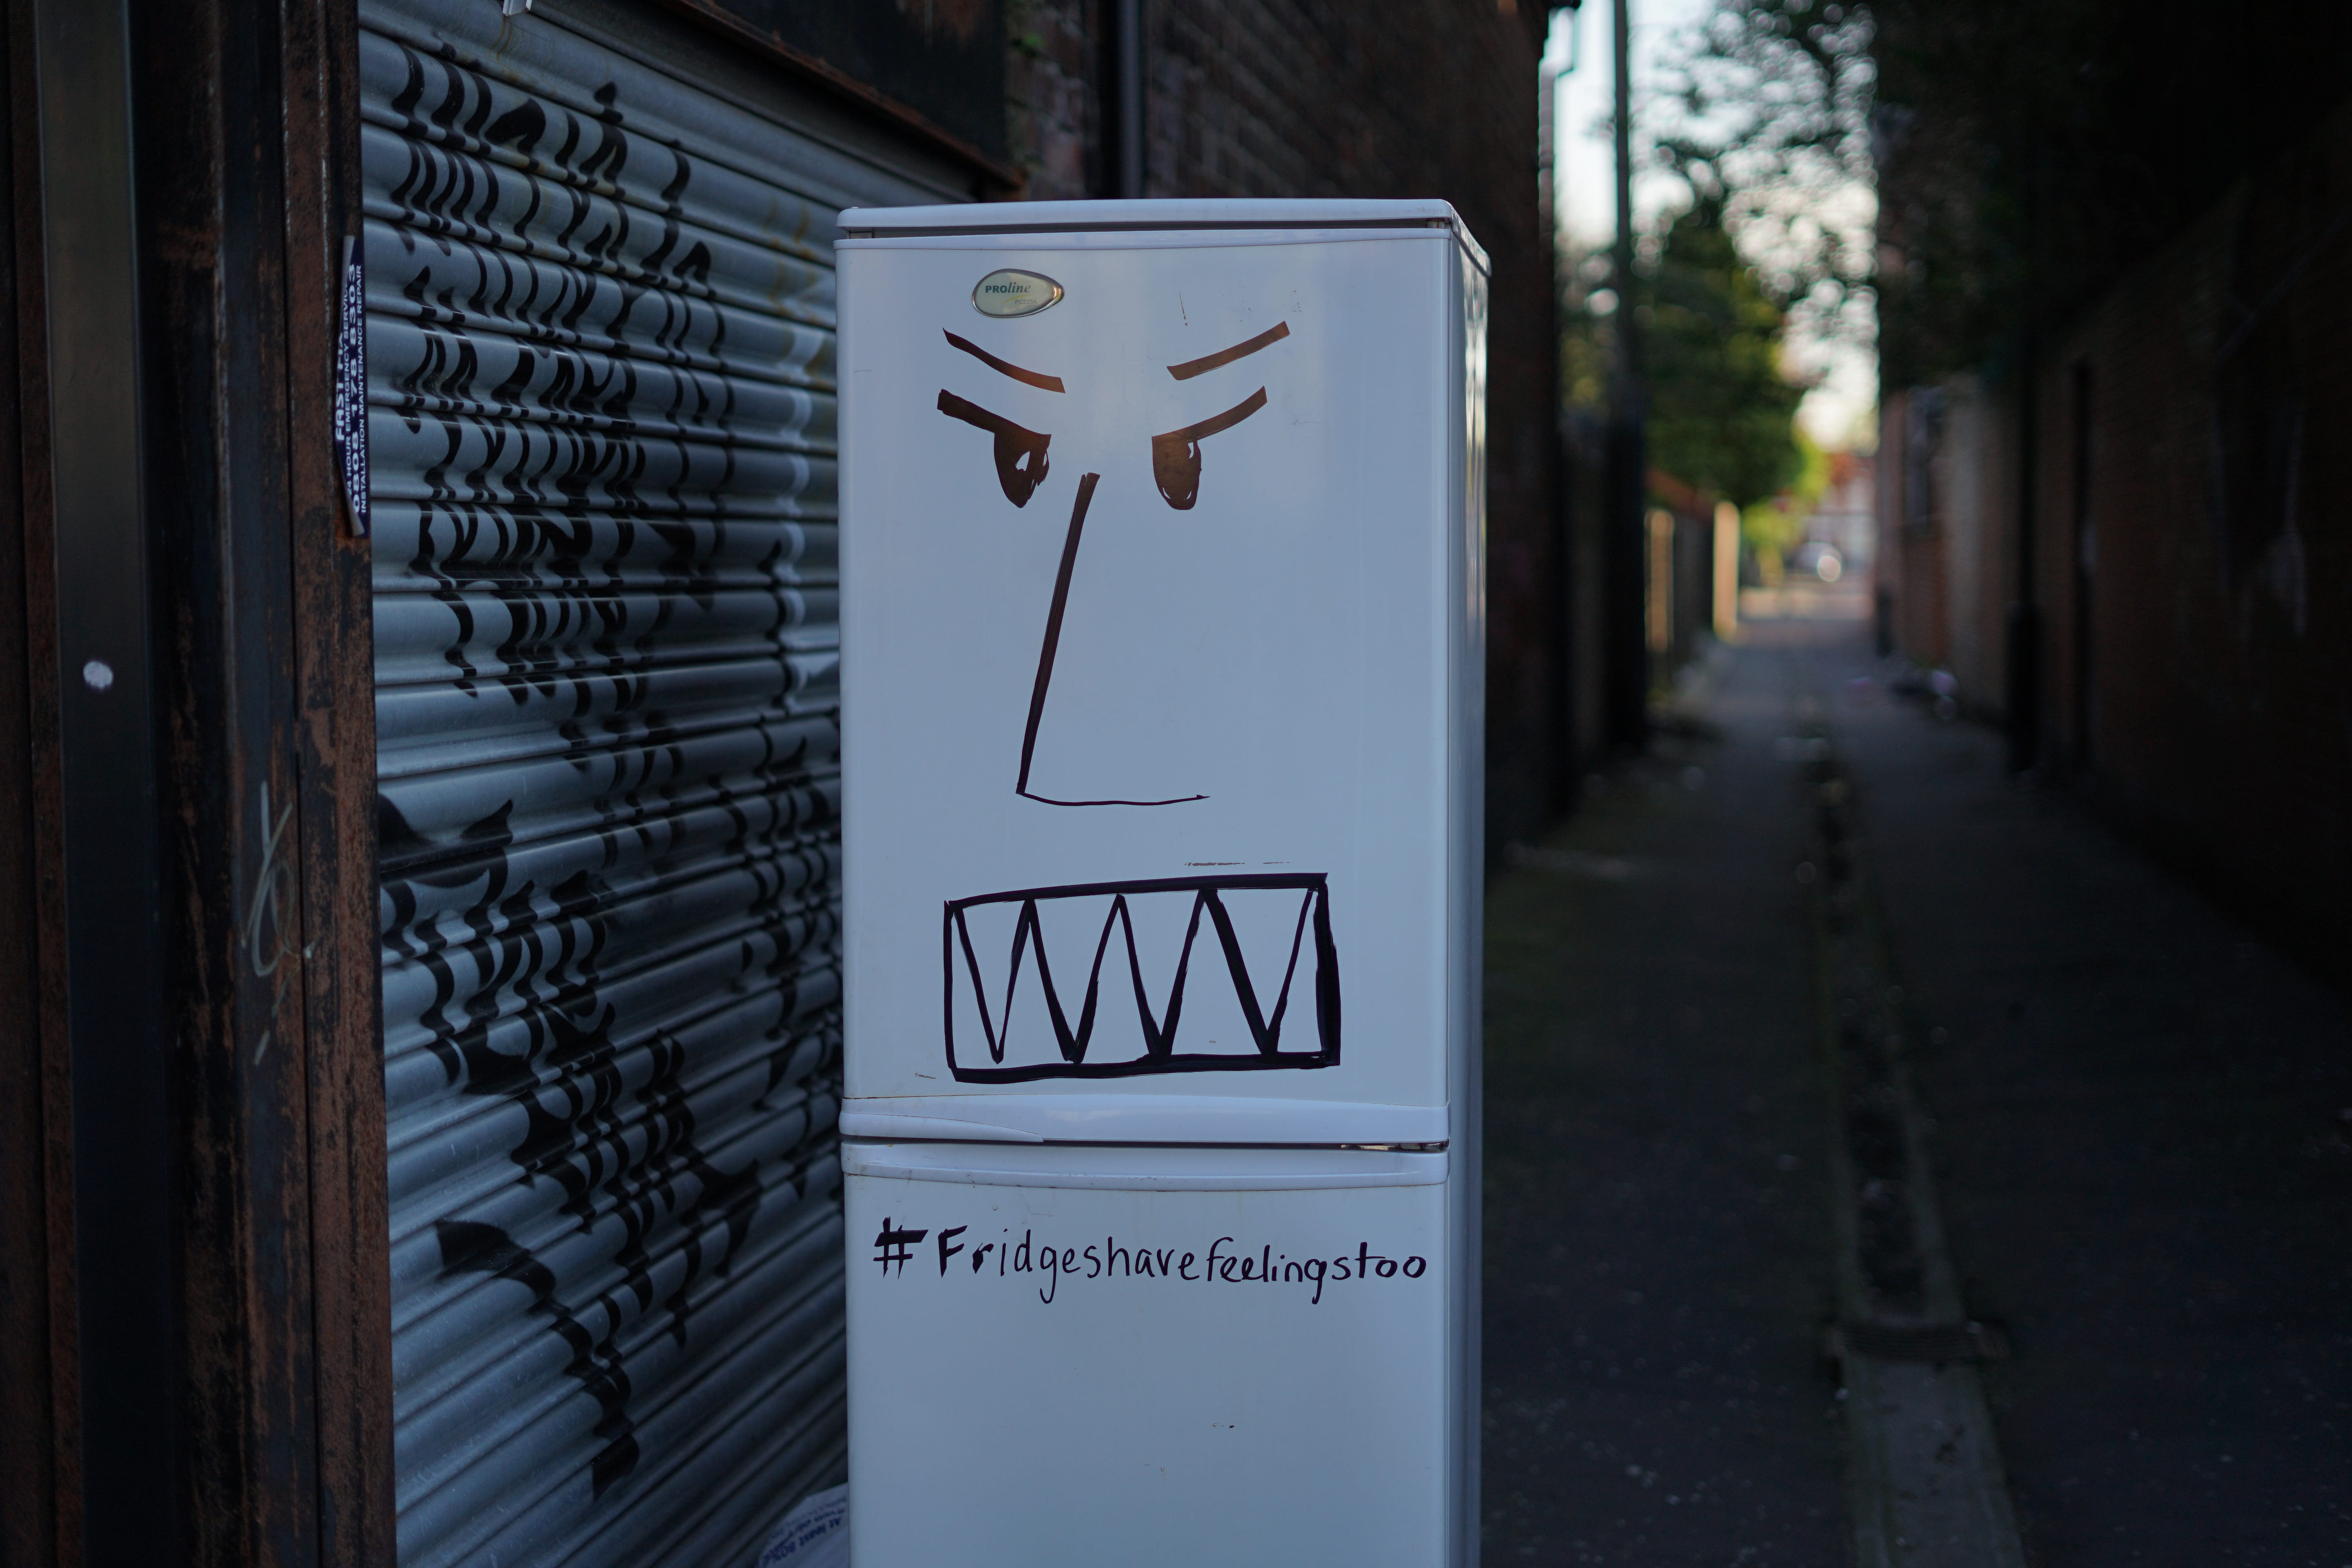 Angry face drawn on fridge